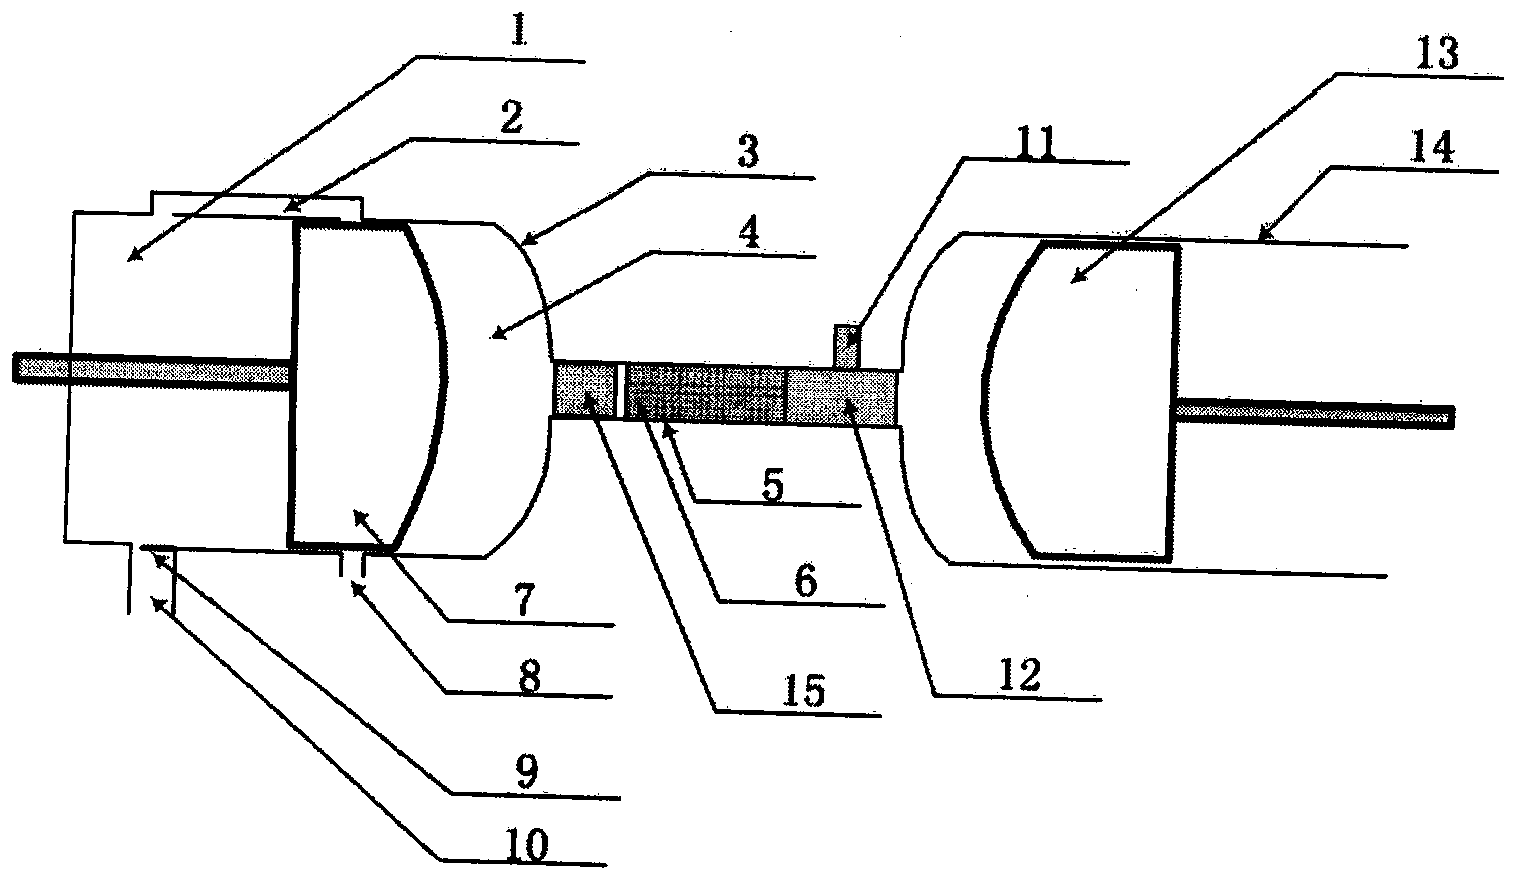 Reciprocating heat accumulating type internal combustion engine for air inlet and air outlet through scavenging duct